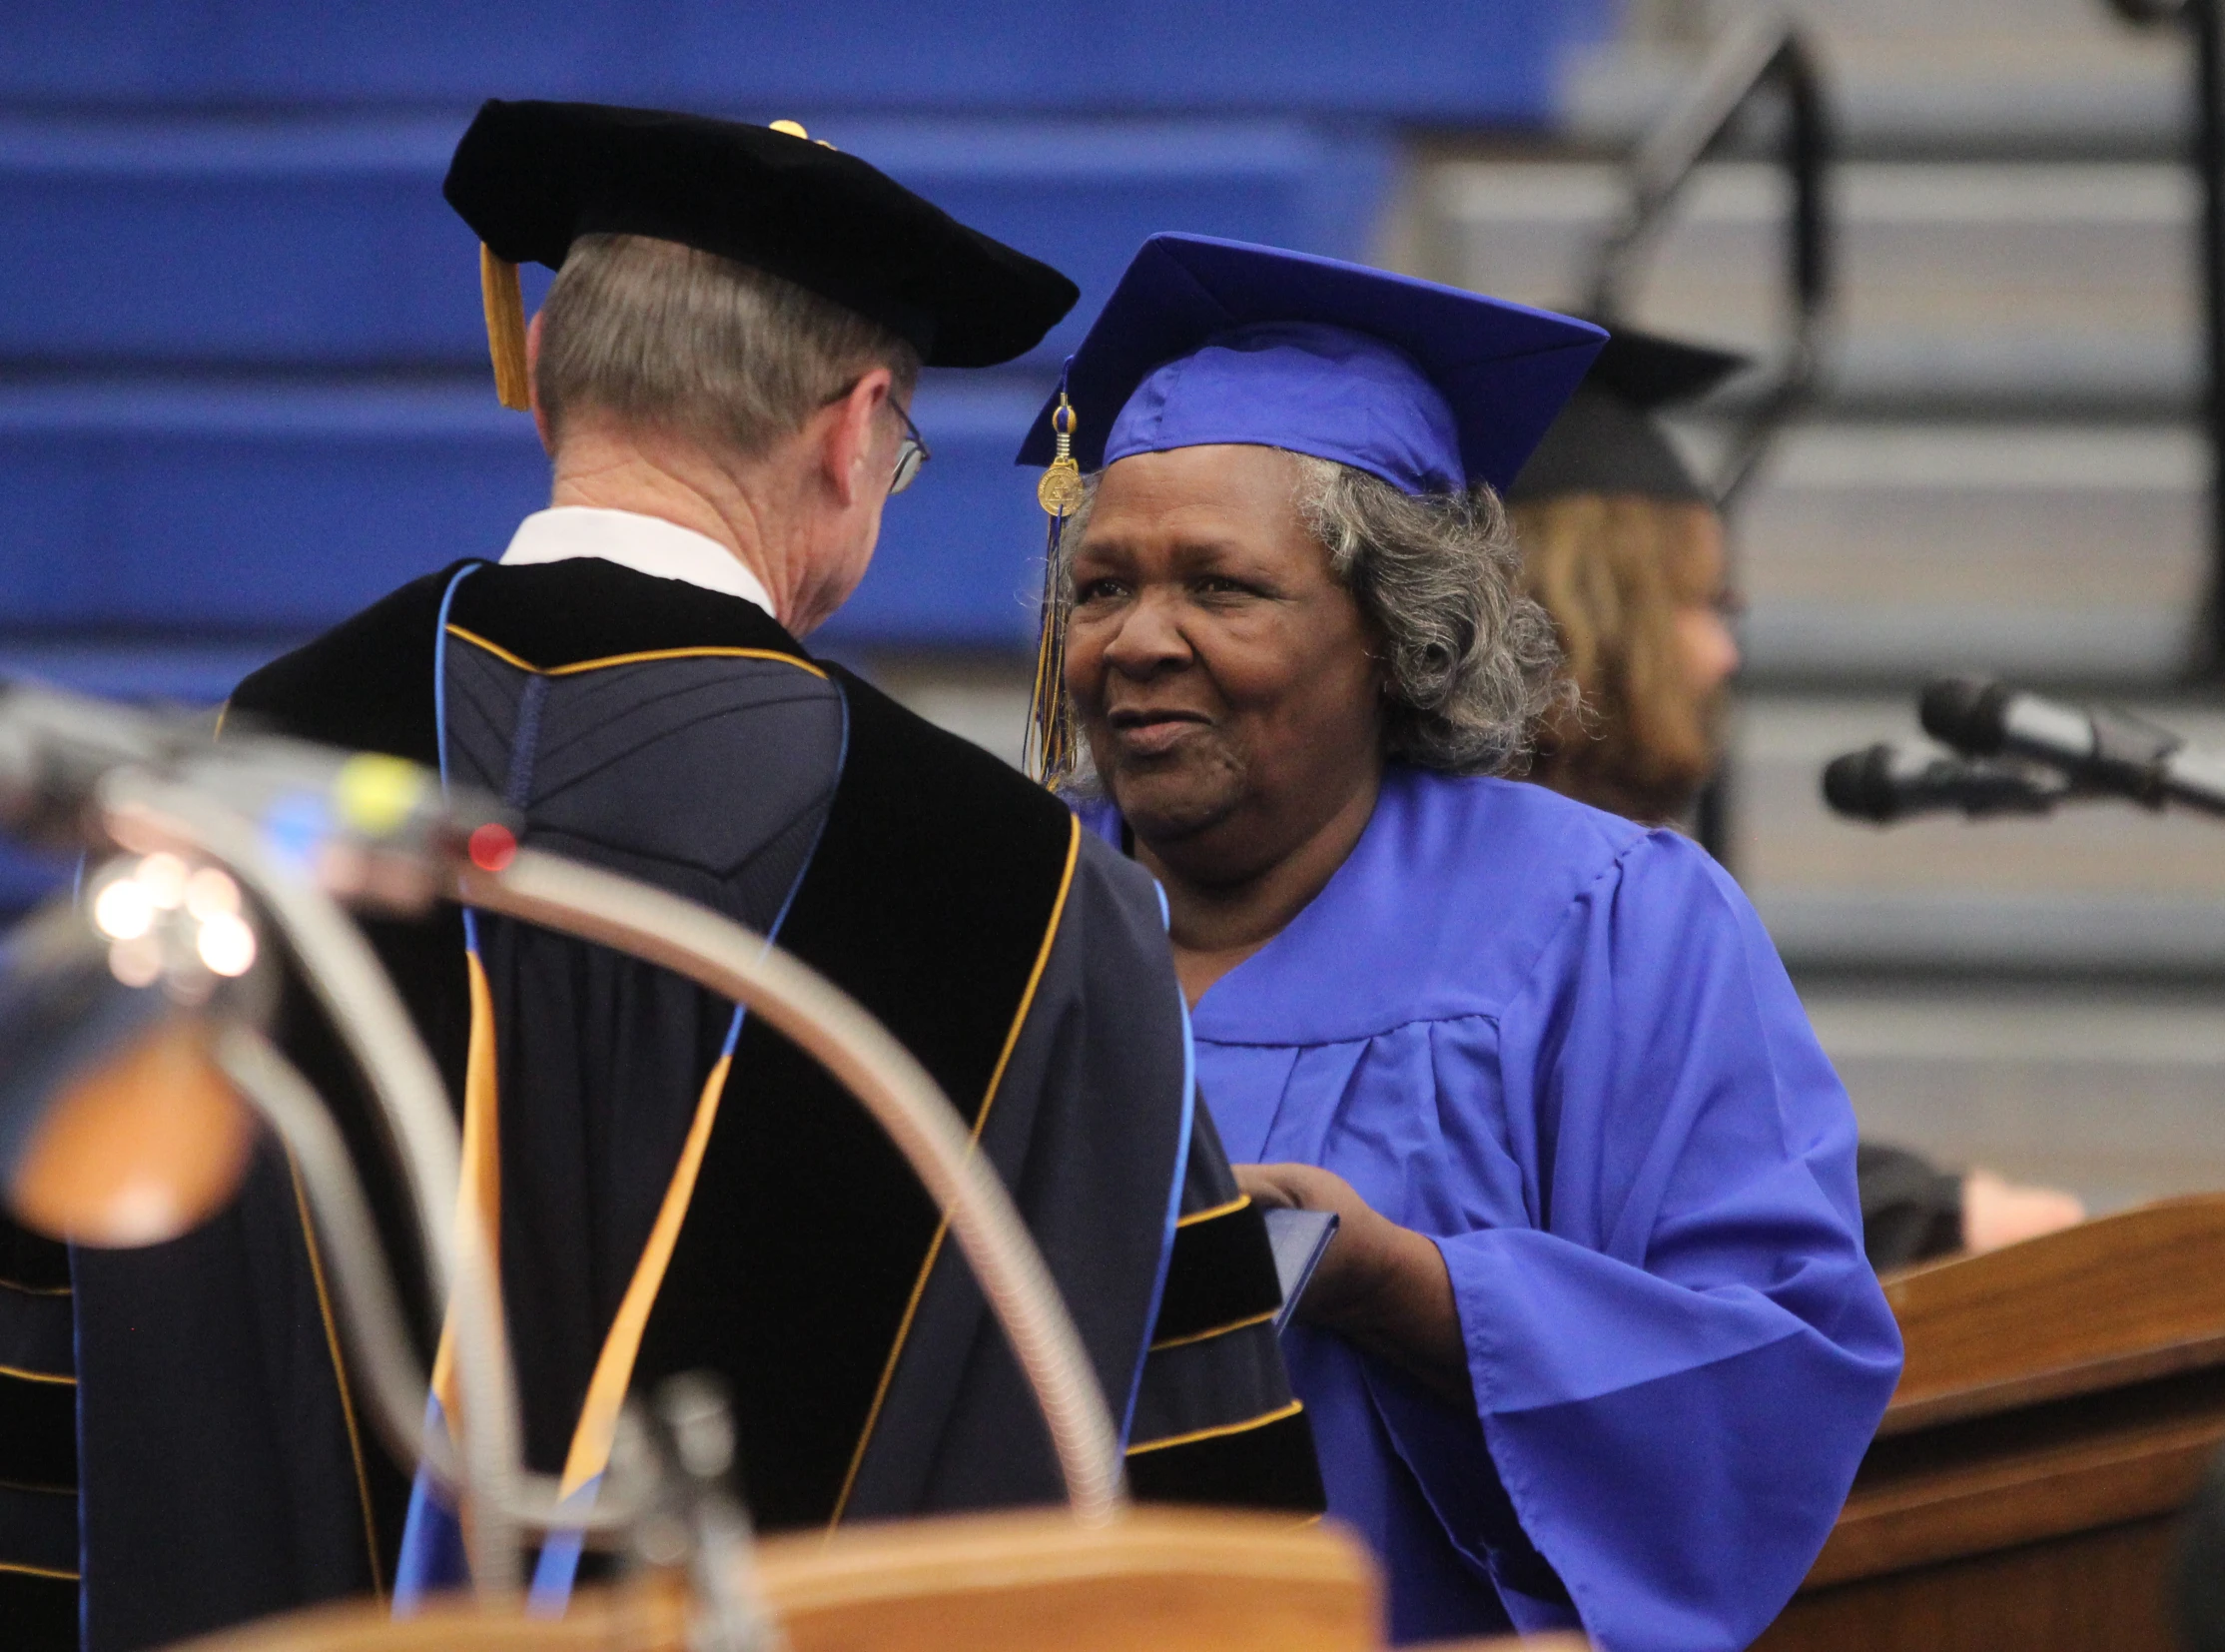 a man in a graduation gown is shaking hands with an older person